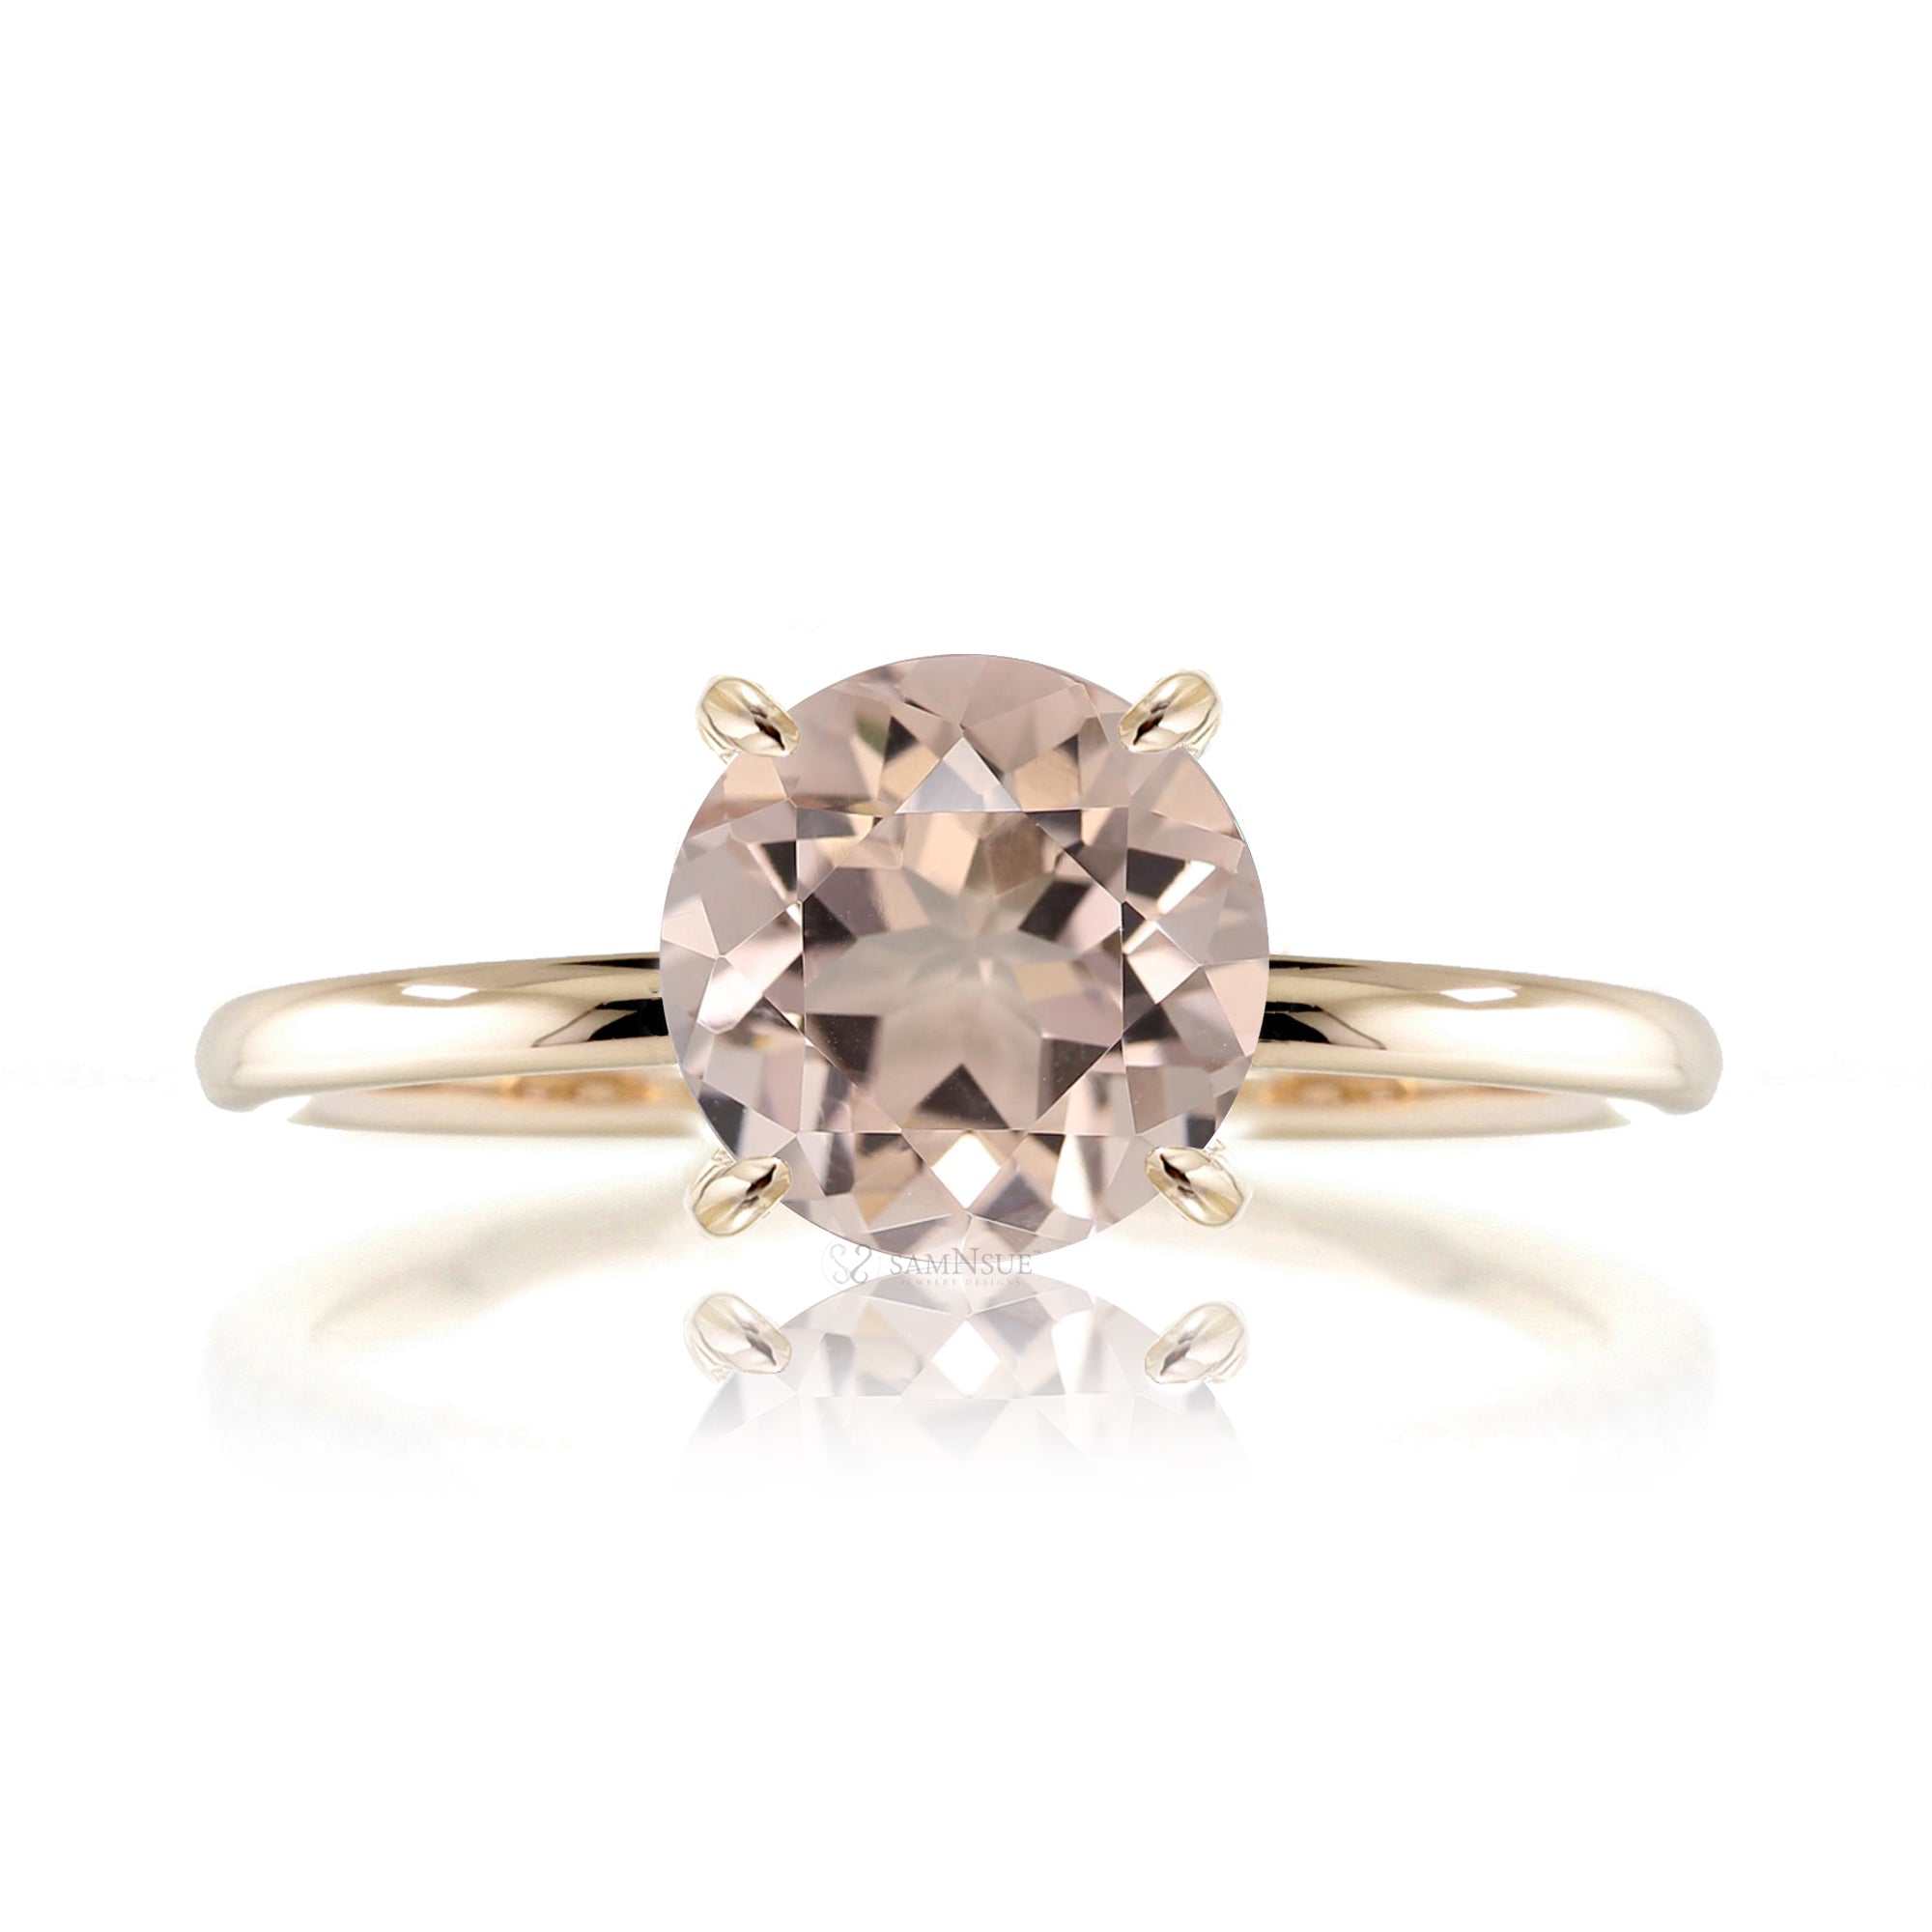 Round morganite solid band engagement ring yellow gold - The Ava